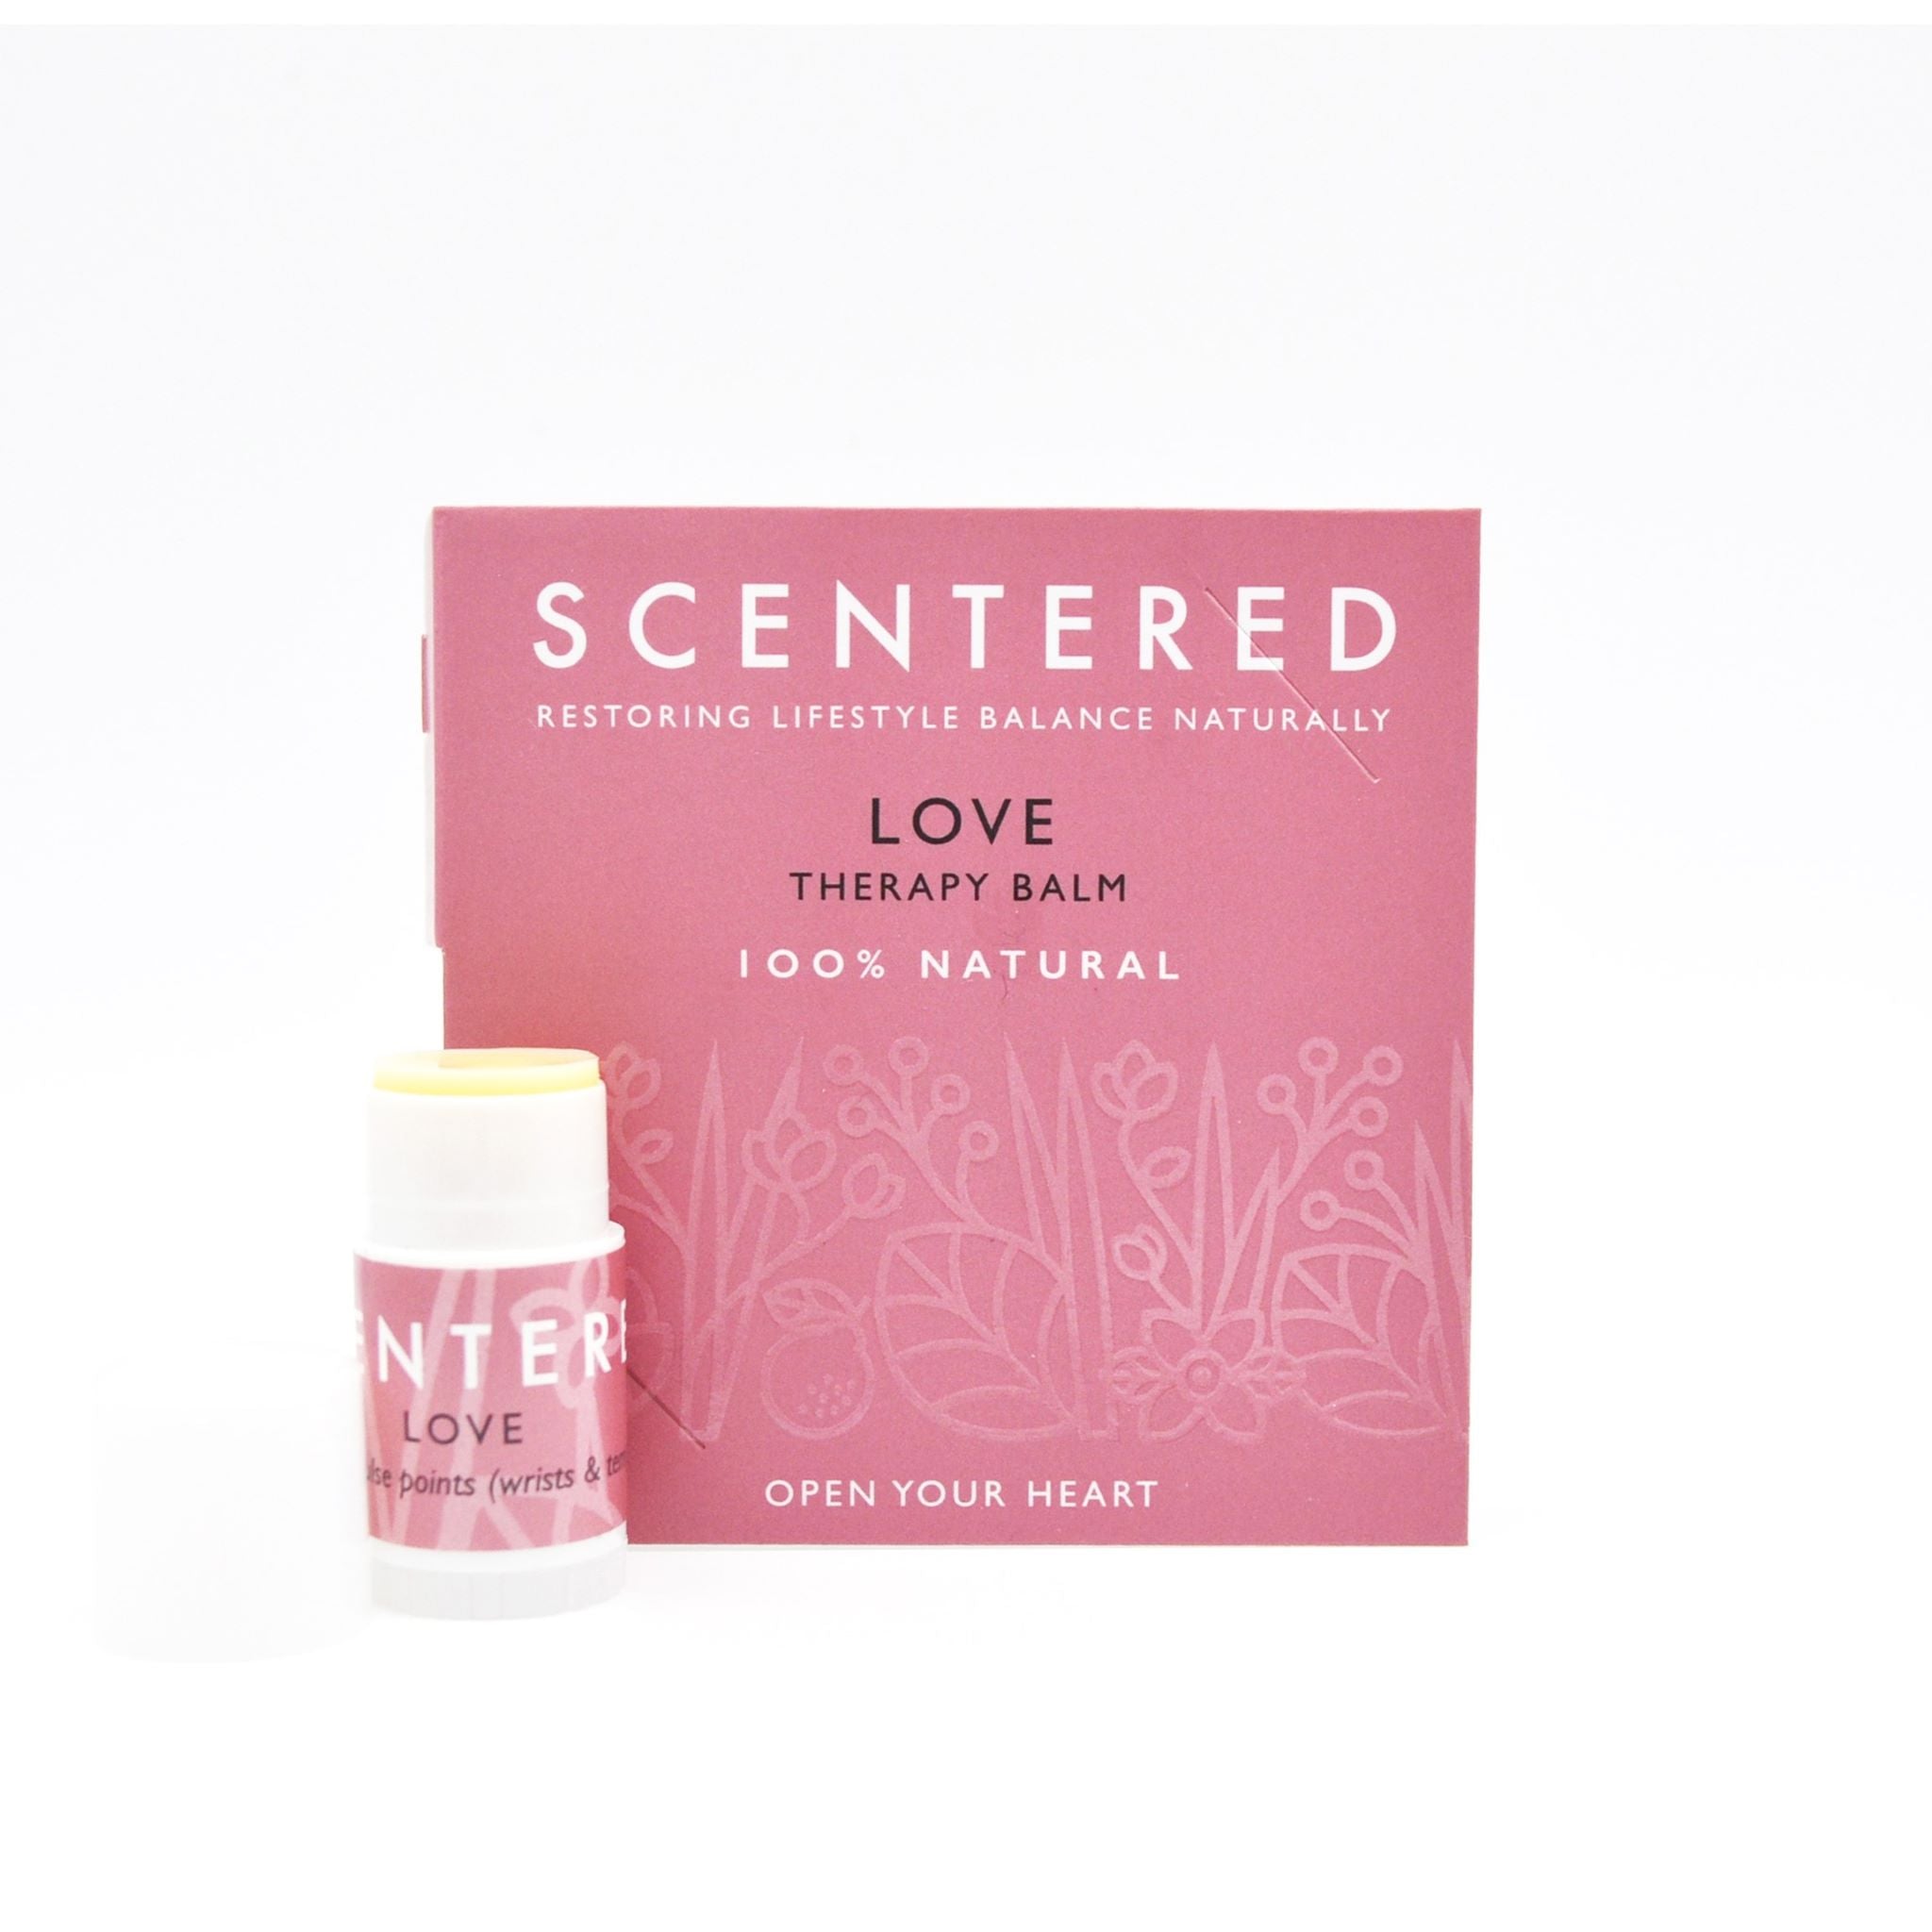 Scentered Love Mini Balm infront of Booklet with no cap and balm twisted up slightly